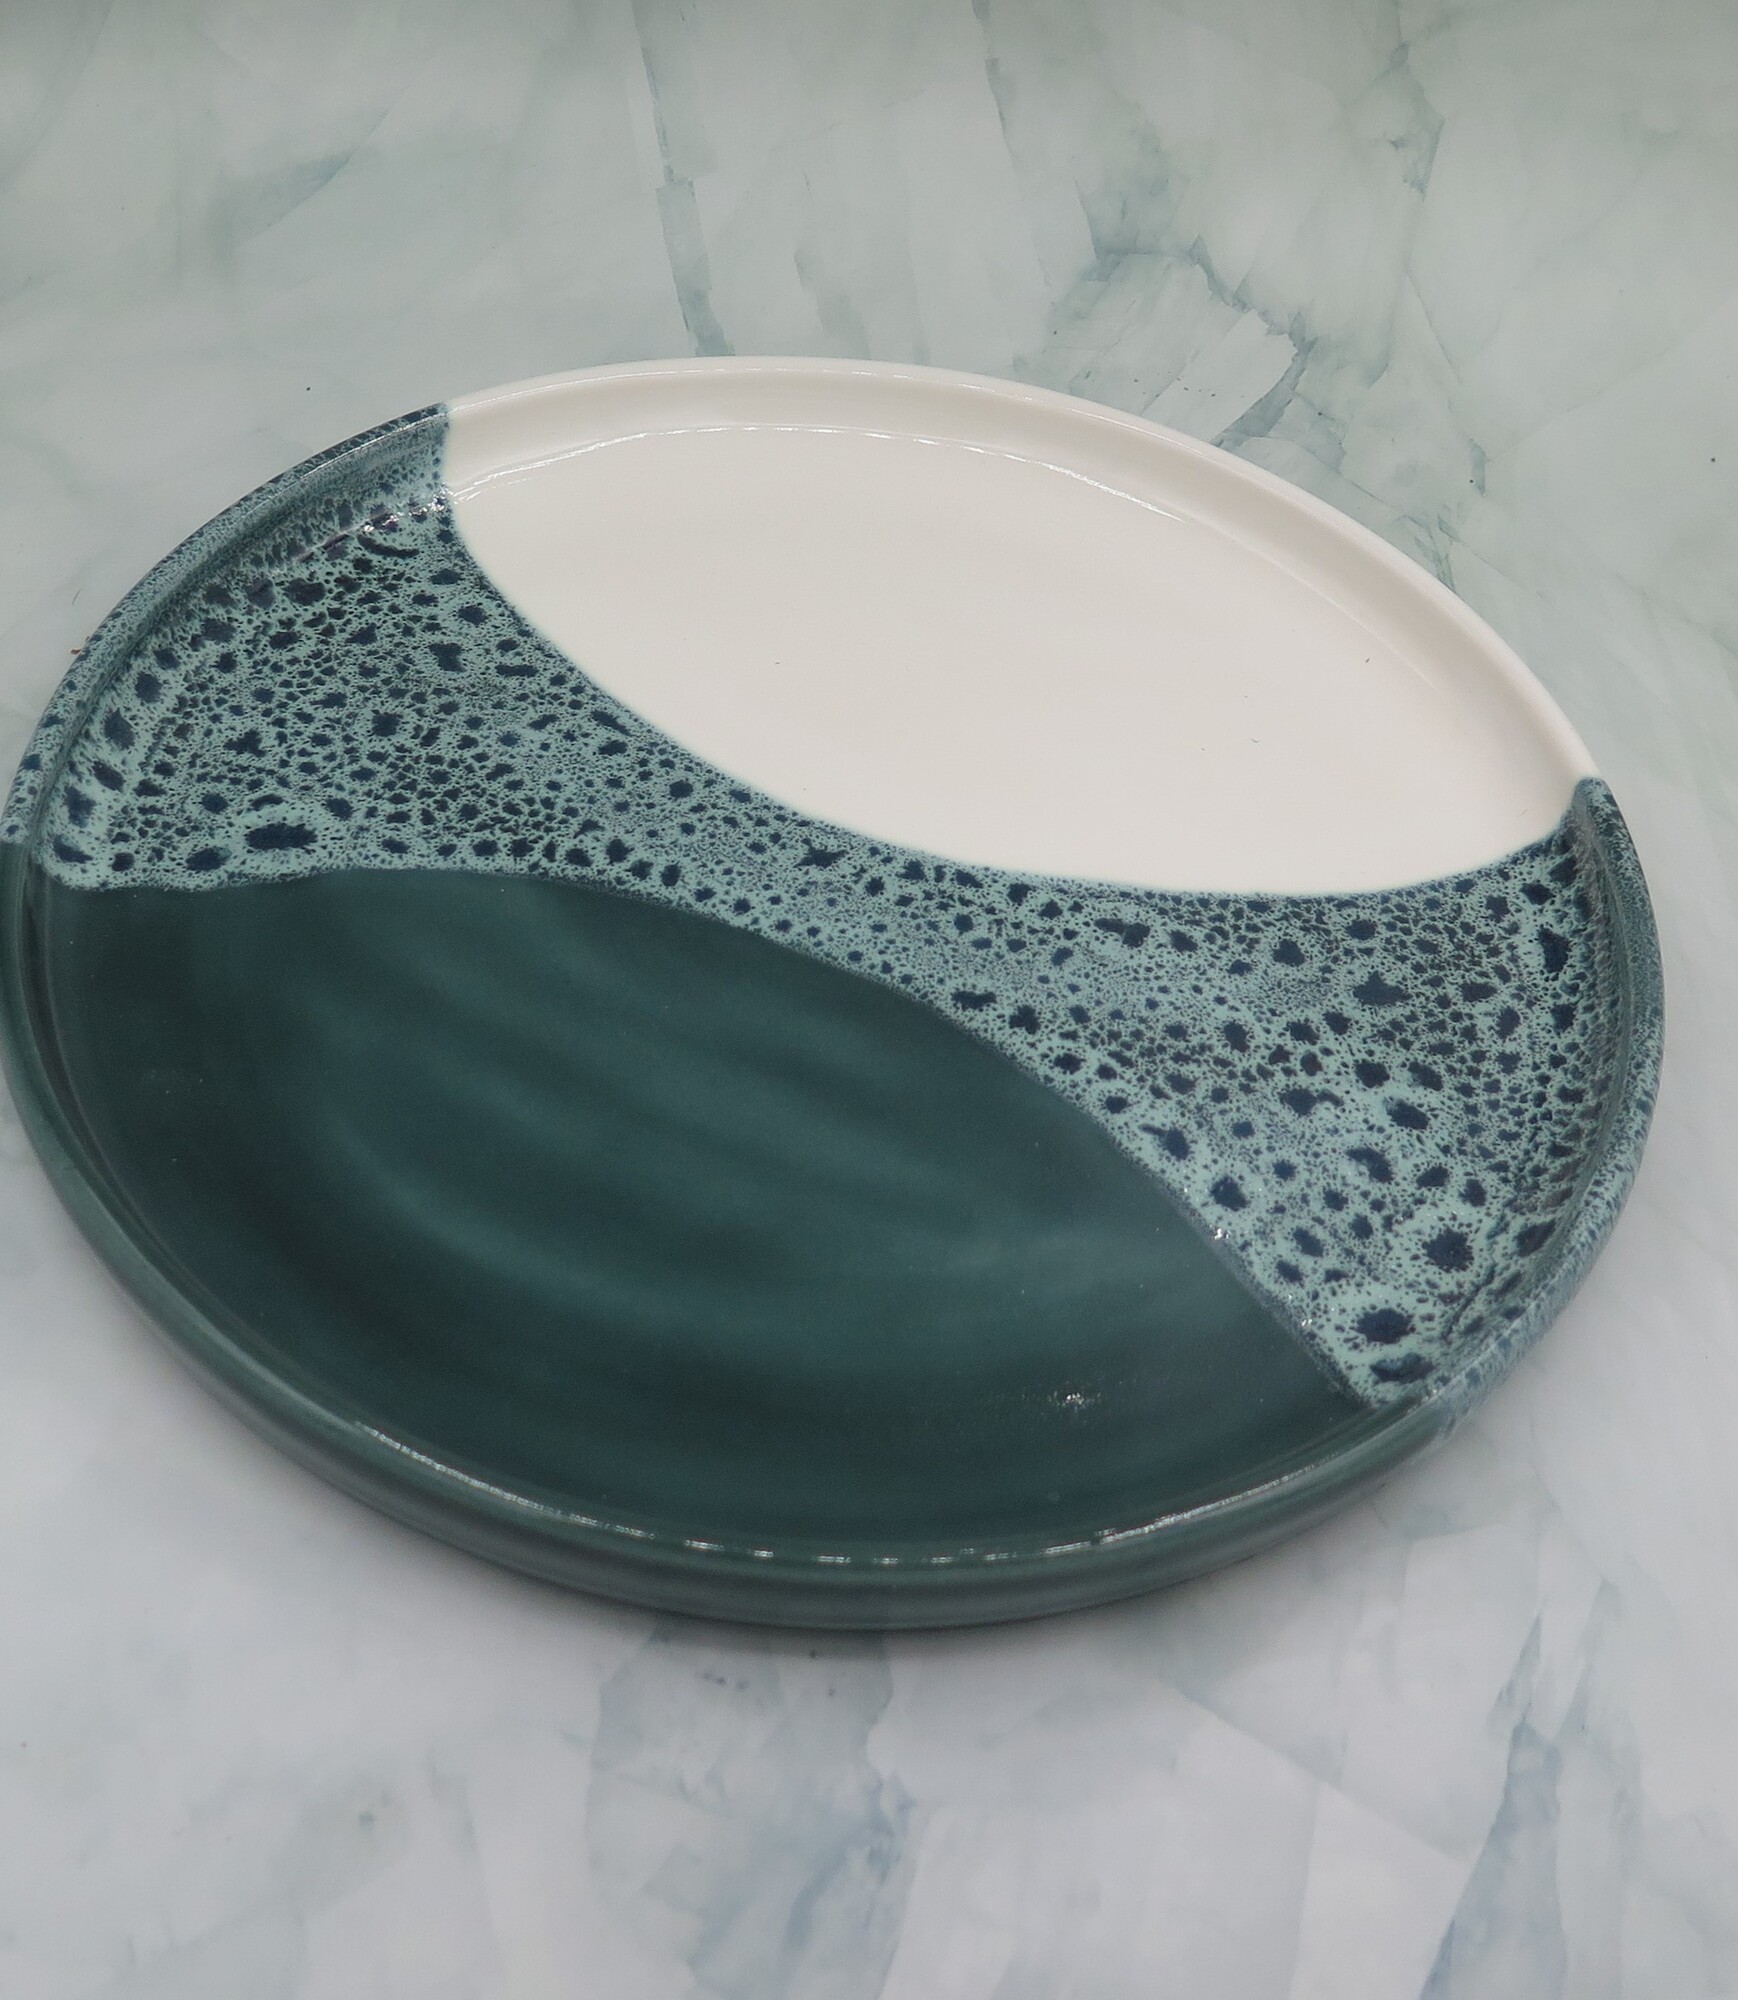 Plate Speckled, Wht/Teal, Size: 9